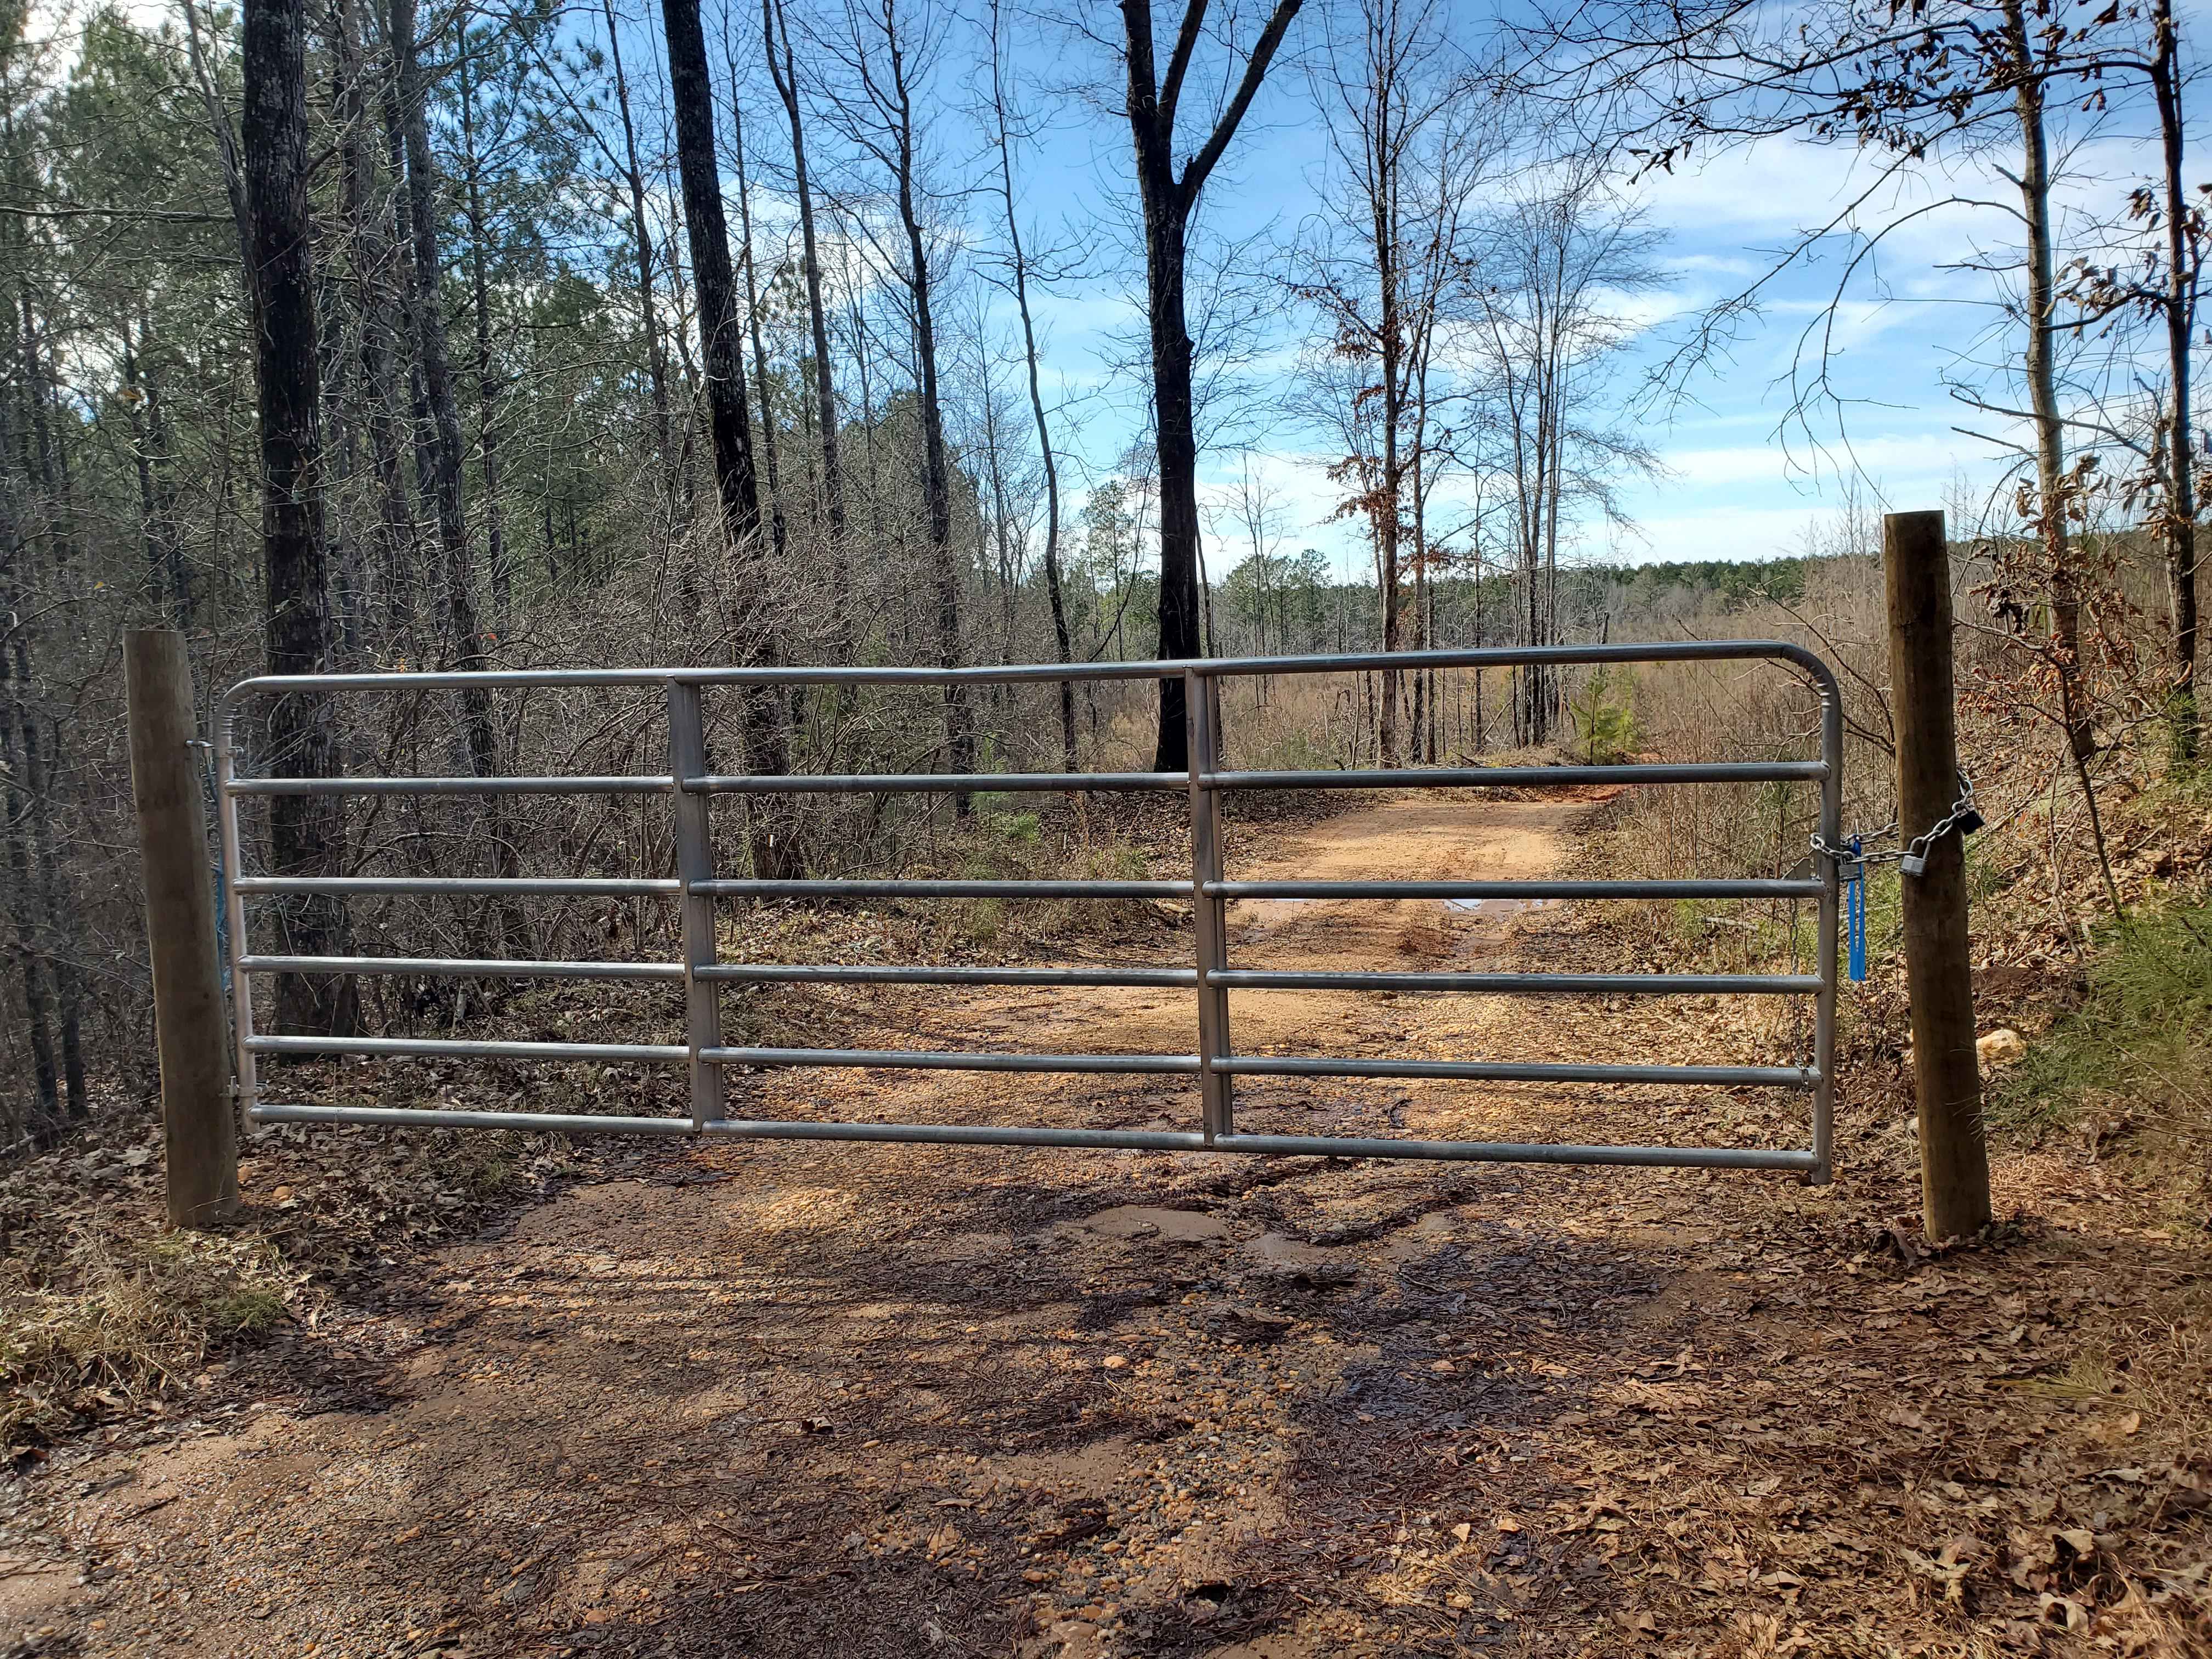 Locked gate on private multi-owner access road (owner's lock is on it)